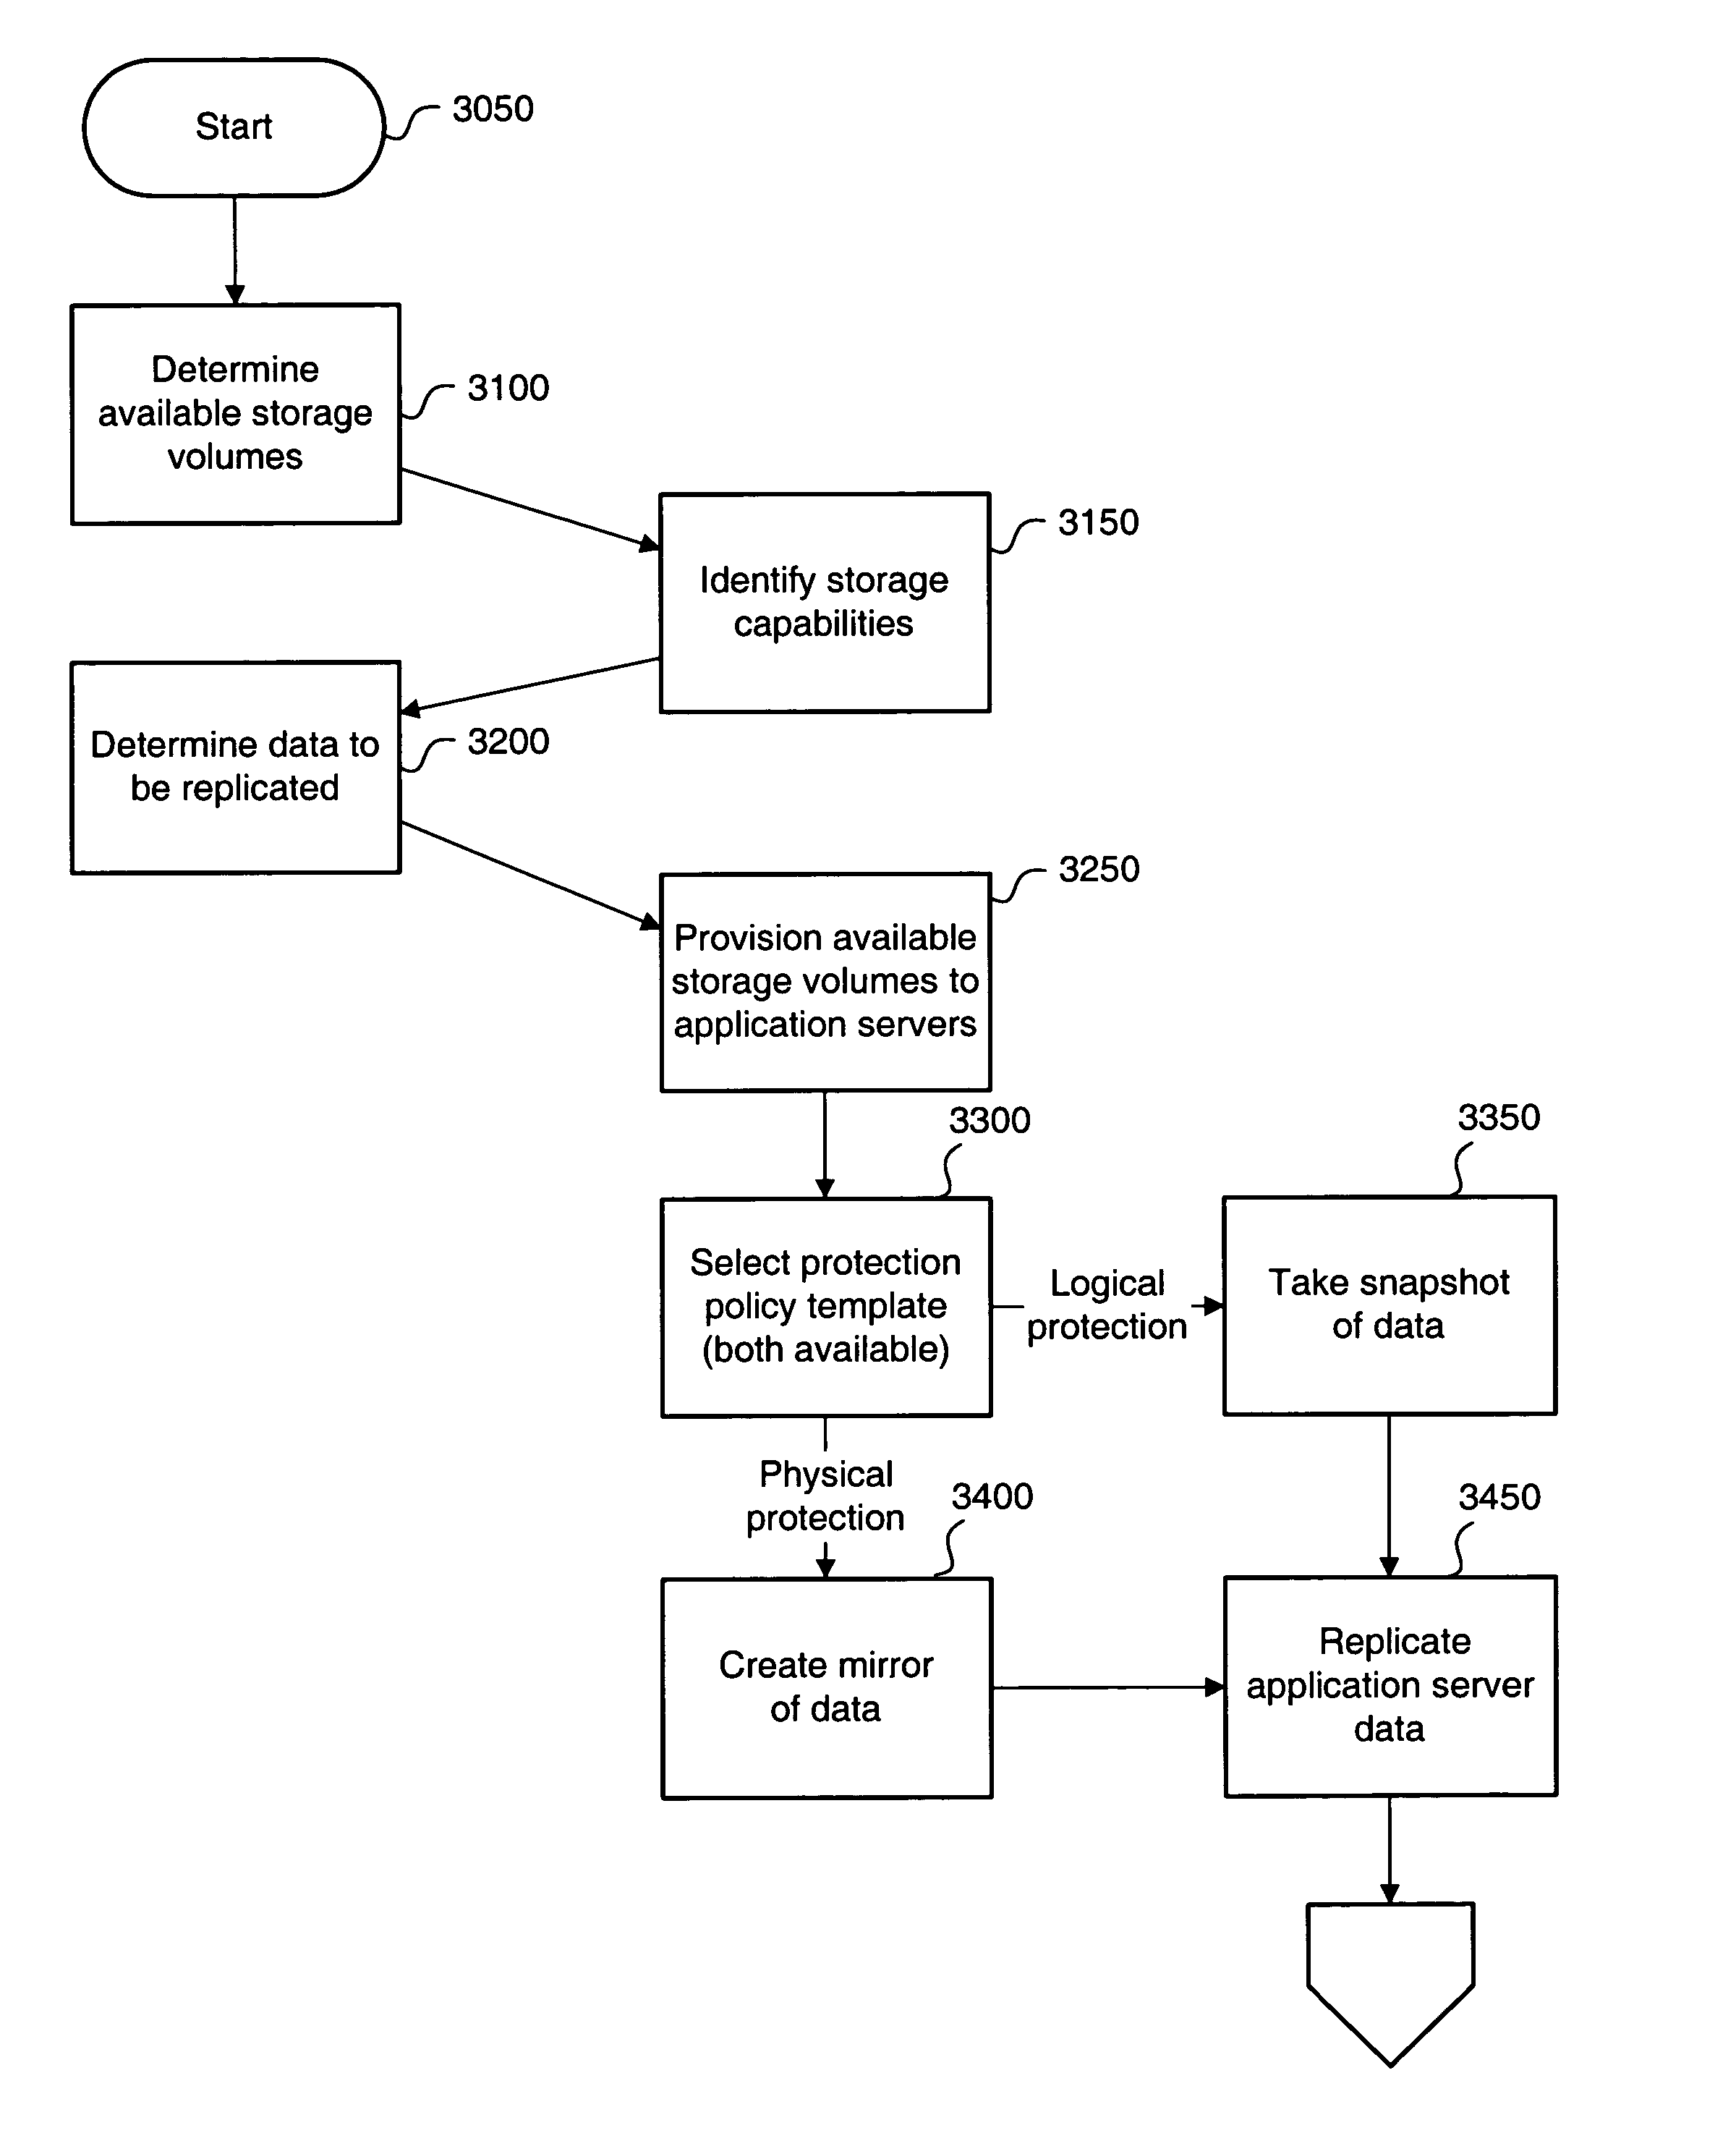 Method and apparatus for creating a storage pool by dynamically mapping replication schema to provisioned storage volumes